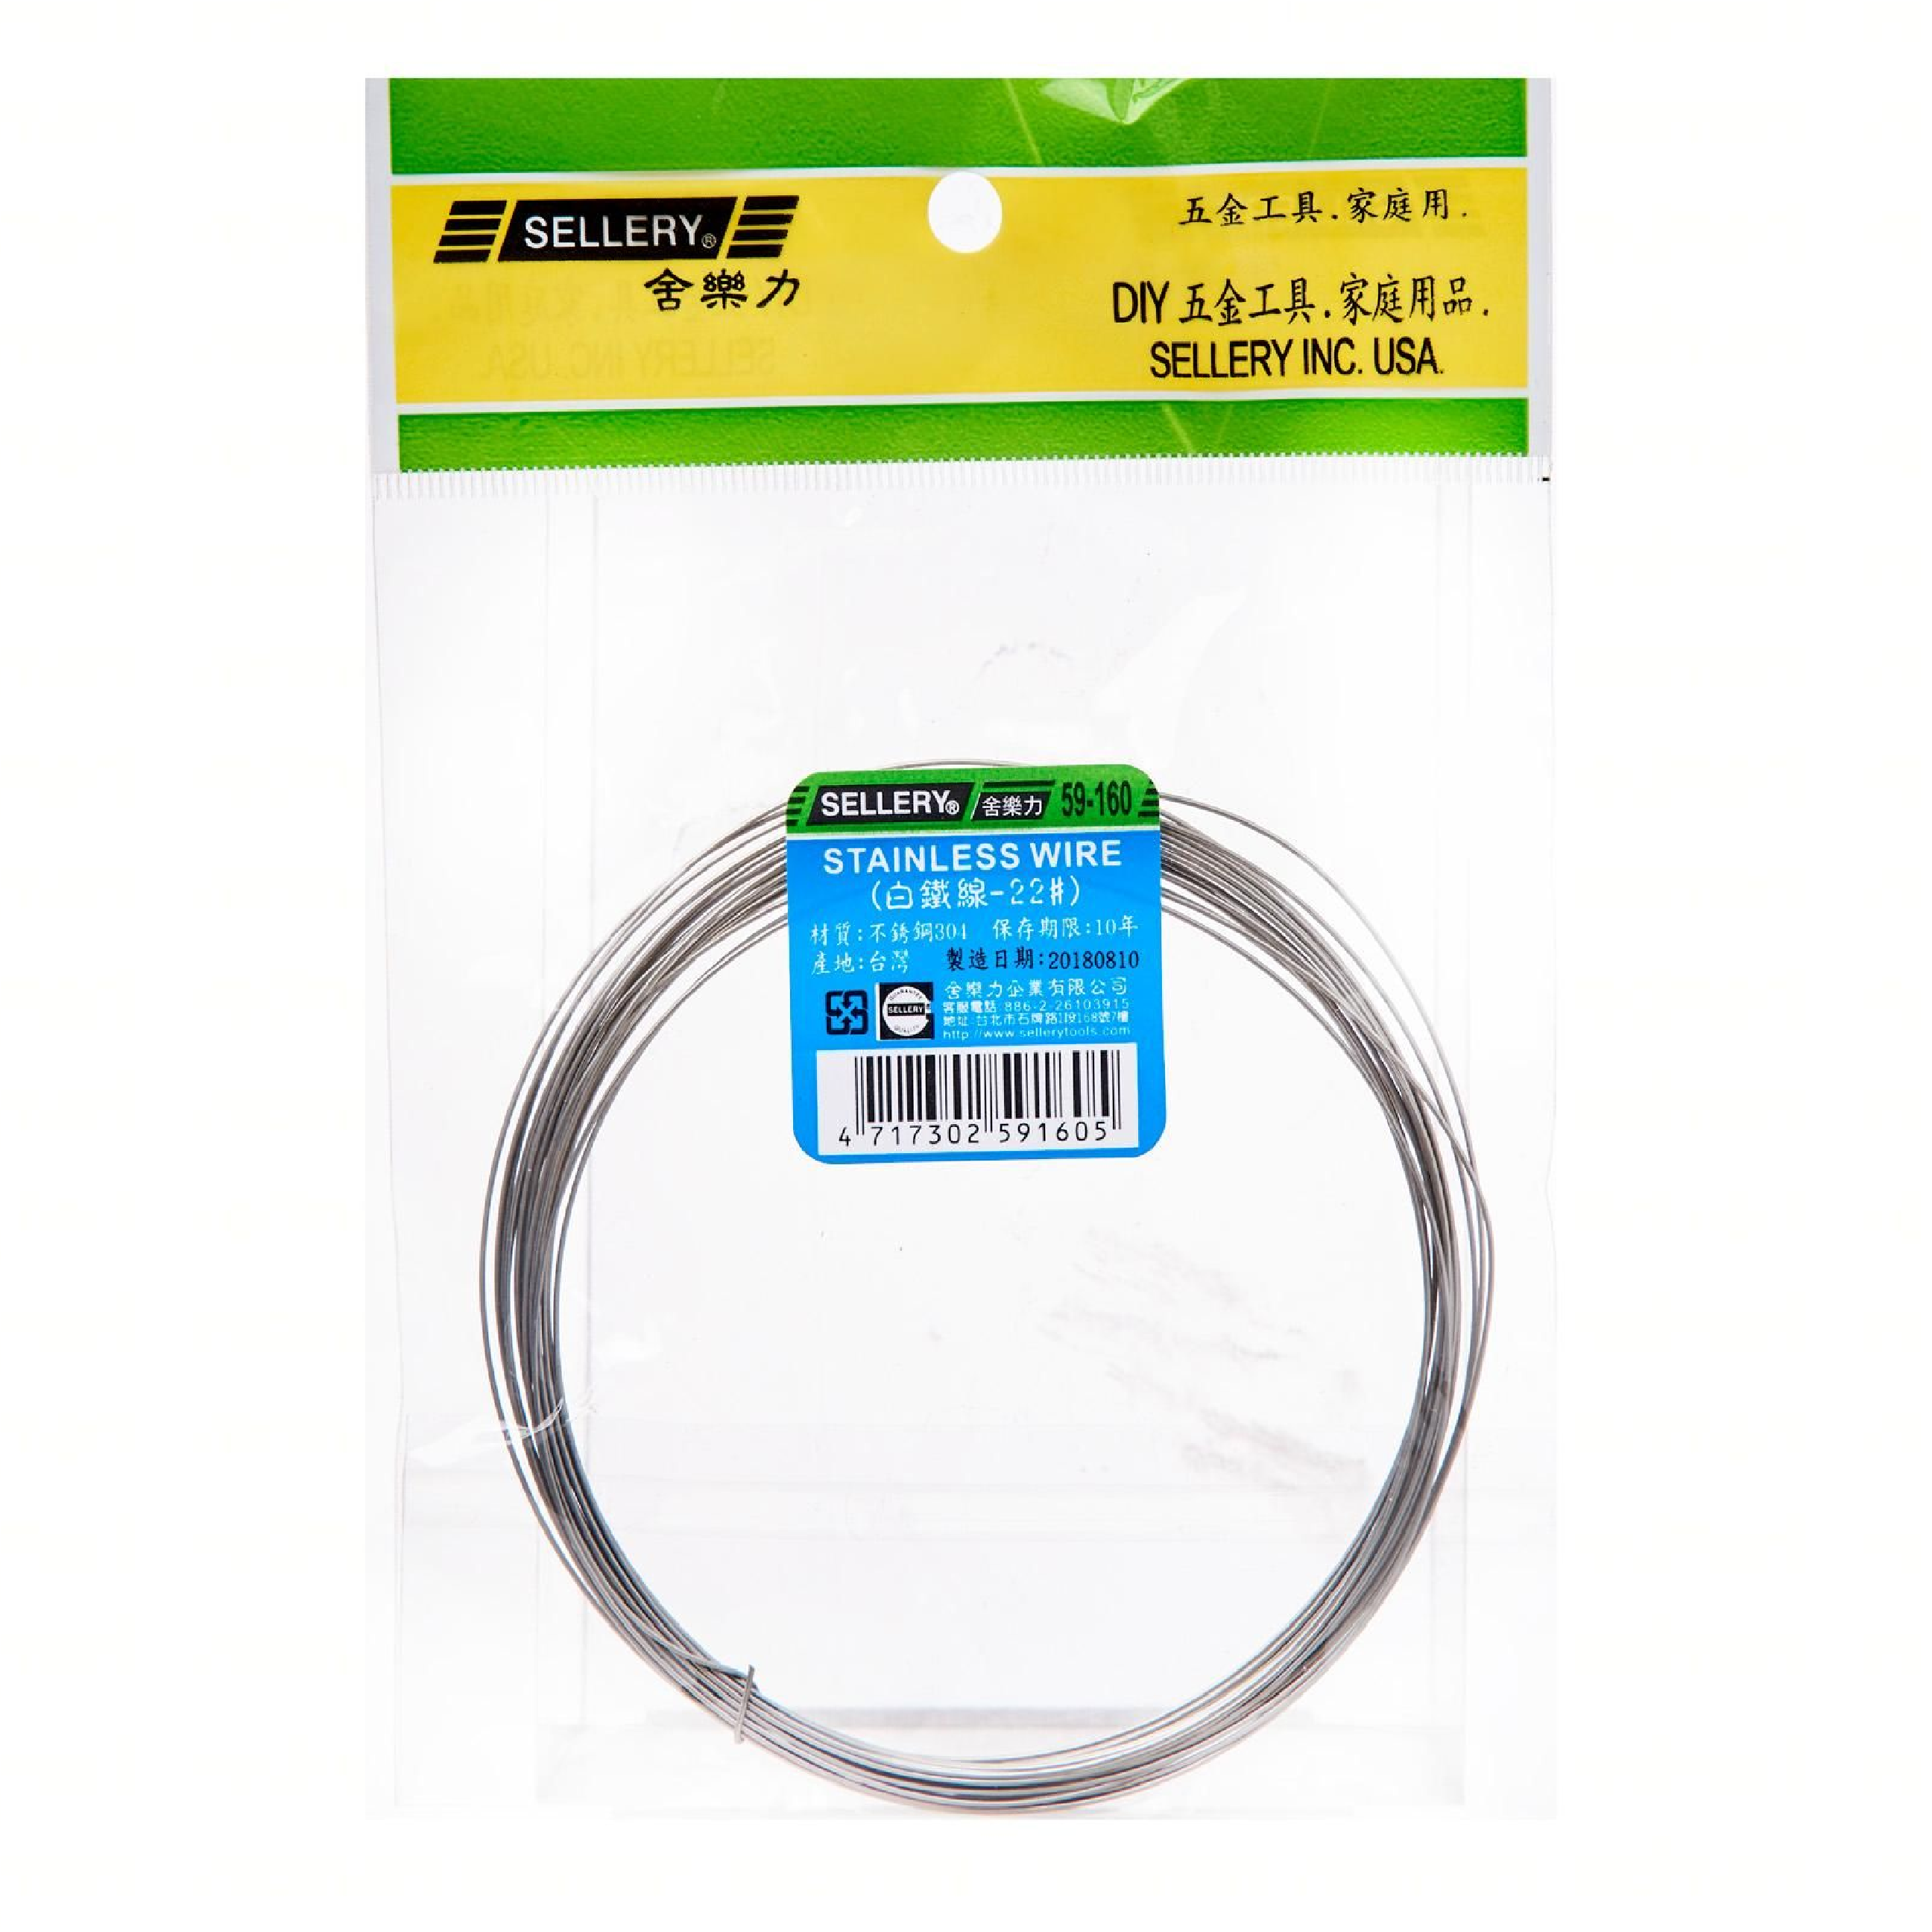 Sellery 59-160 Stainless Steel Wire #22 X 830CM (1.2MM)